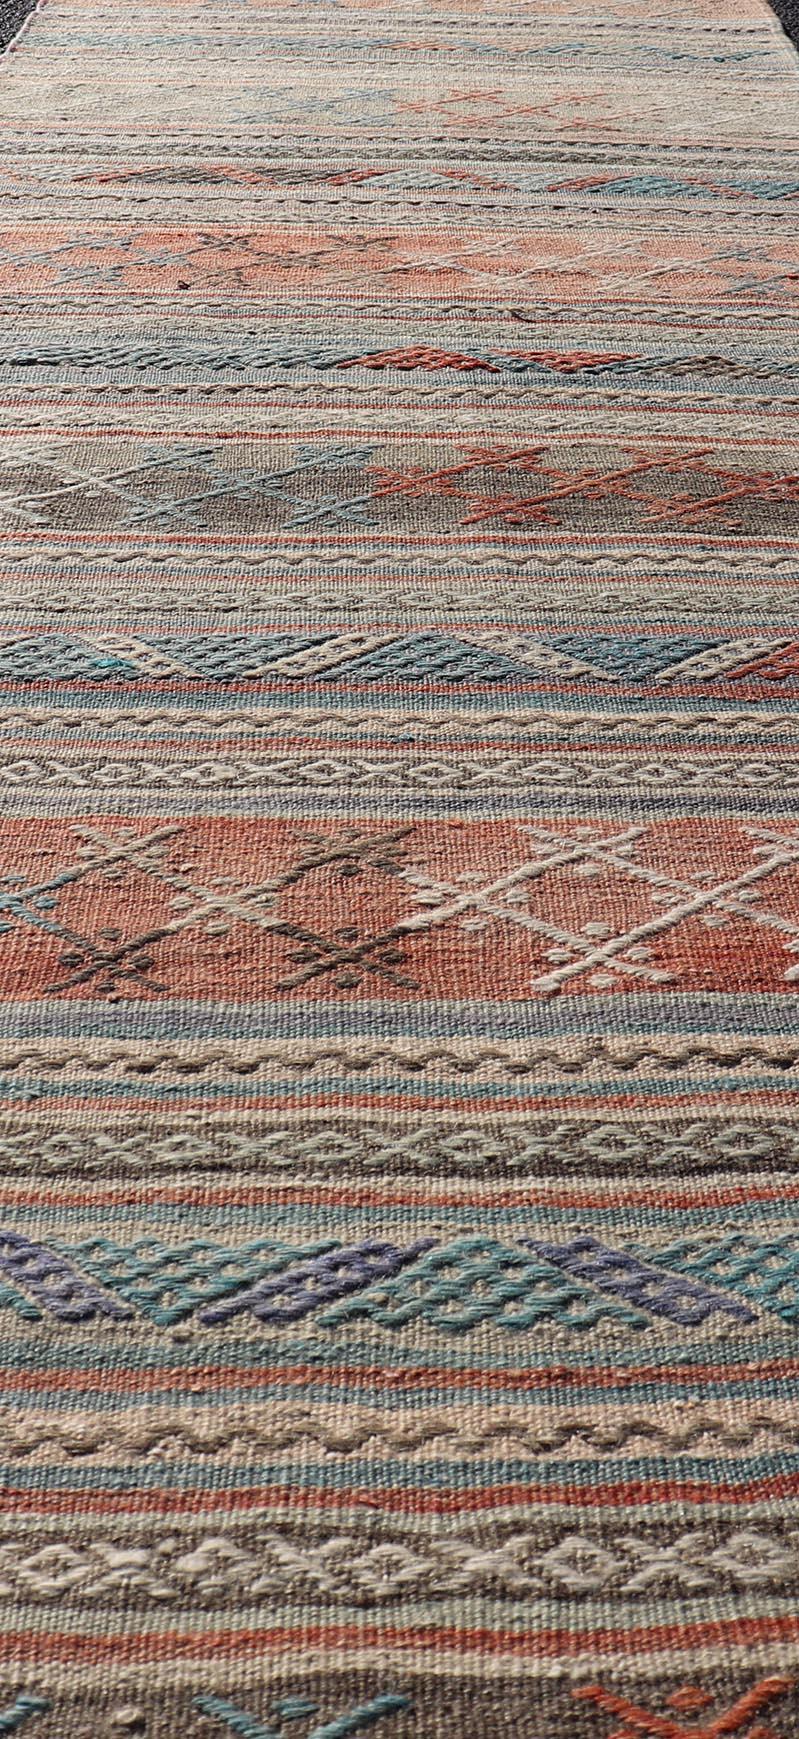 20th Century Vintage Turkish Colorful Kilim Runner with Stripe Design in Tan and Orange's For Sale